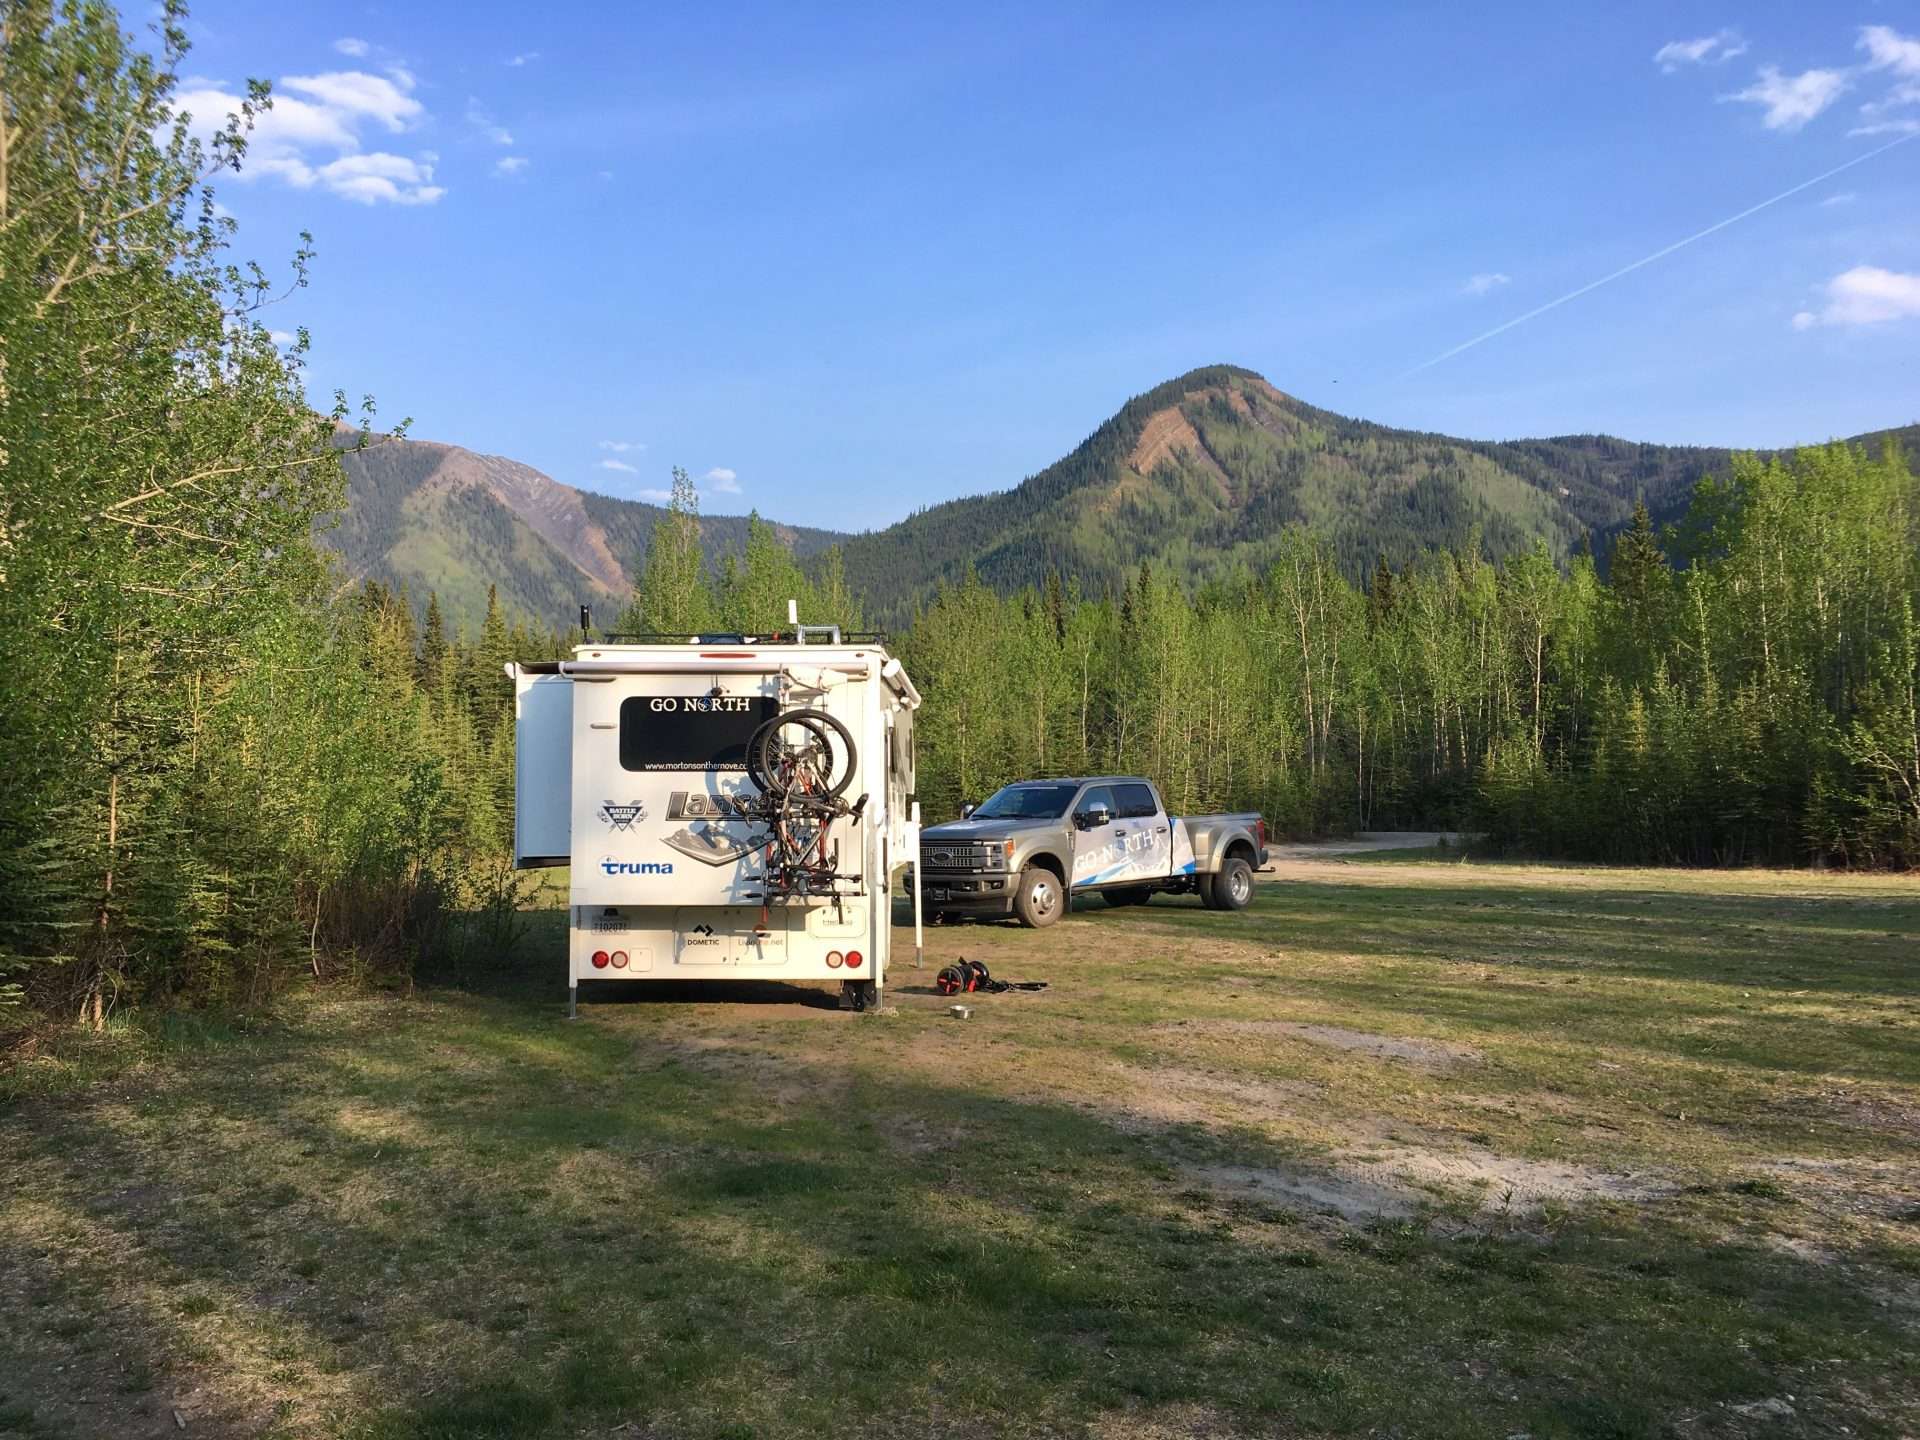 Stable truck camper at campsite by mountains